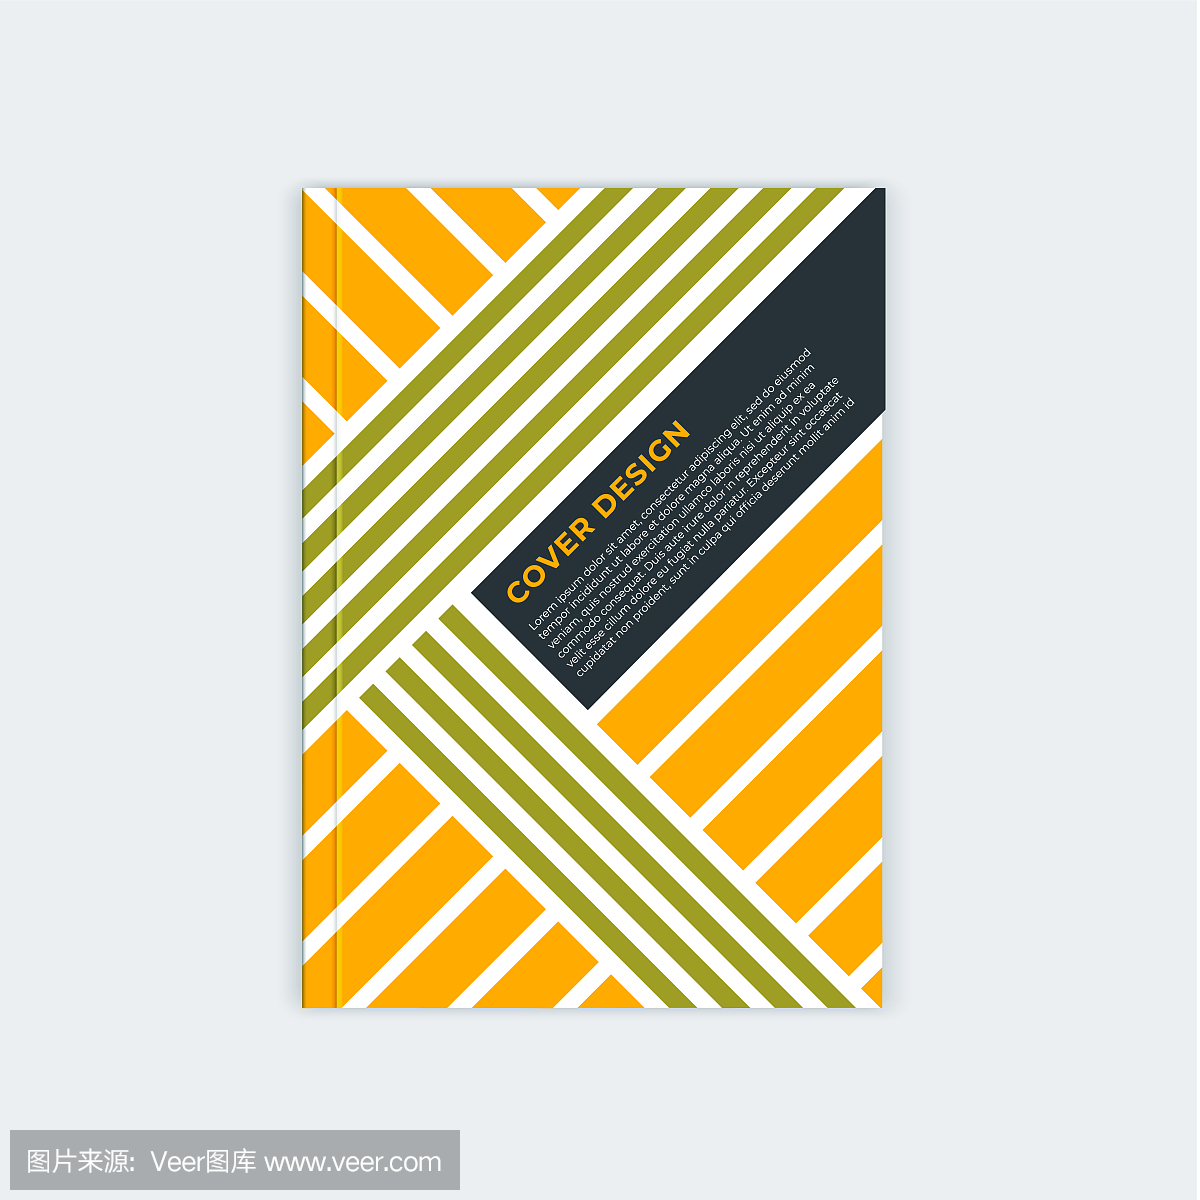 Minimalistic brochure template design. Flyer, booklet, annual report cover template. Modern diagonal abstract stripes. Place under the heading and text.